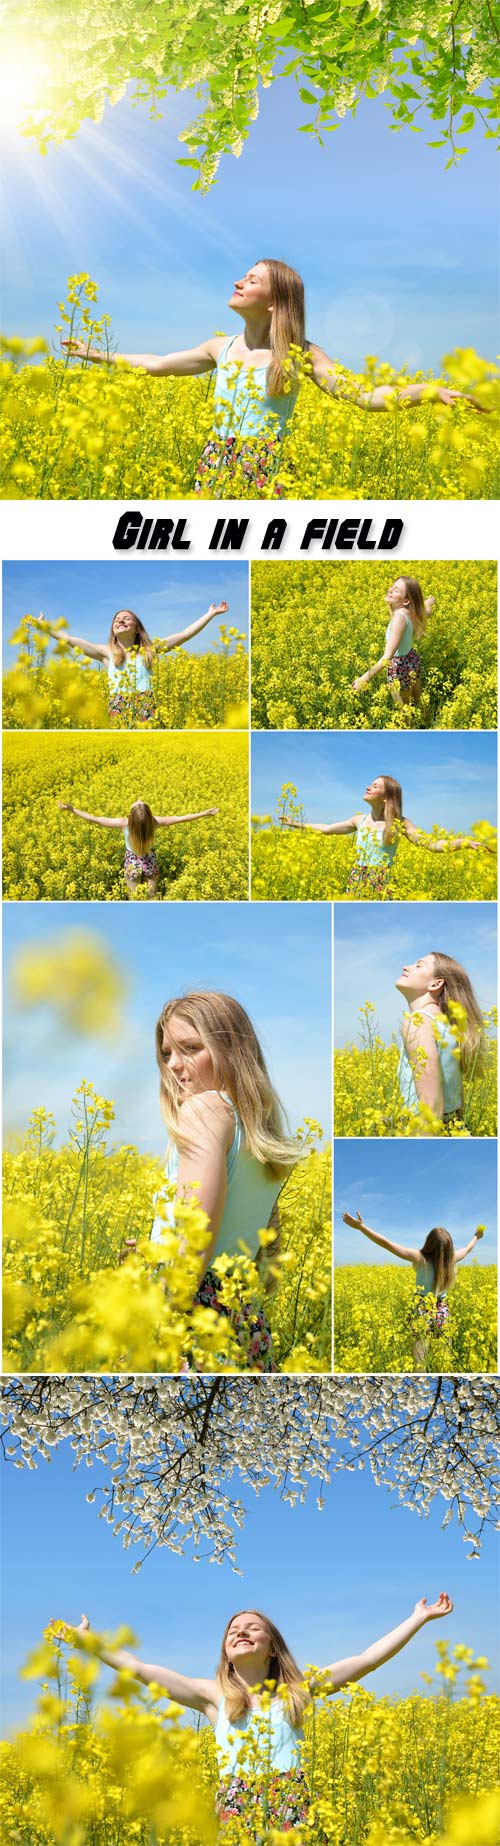 Girl in a field with yellow flowers